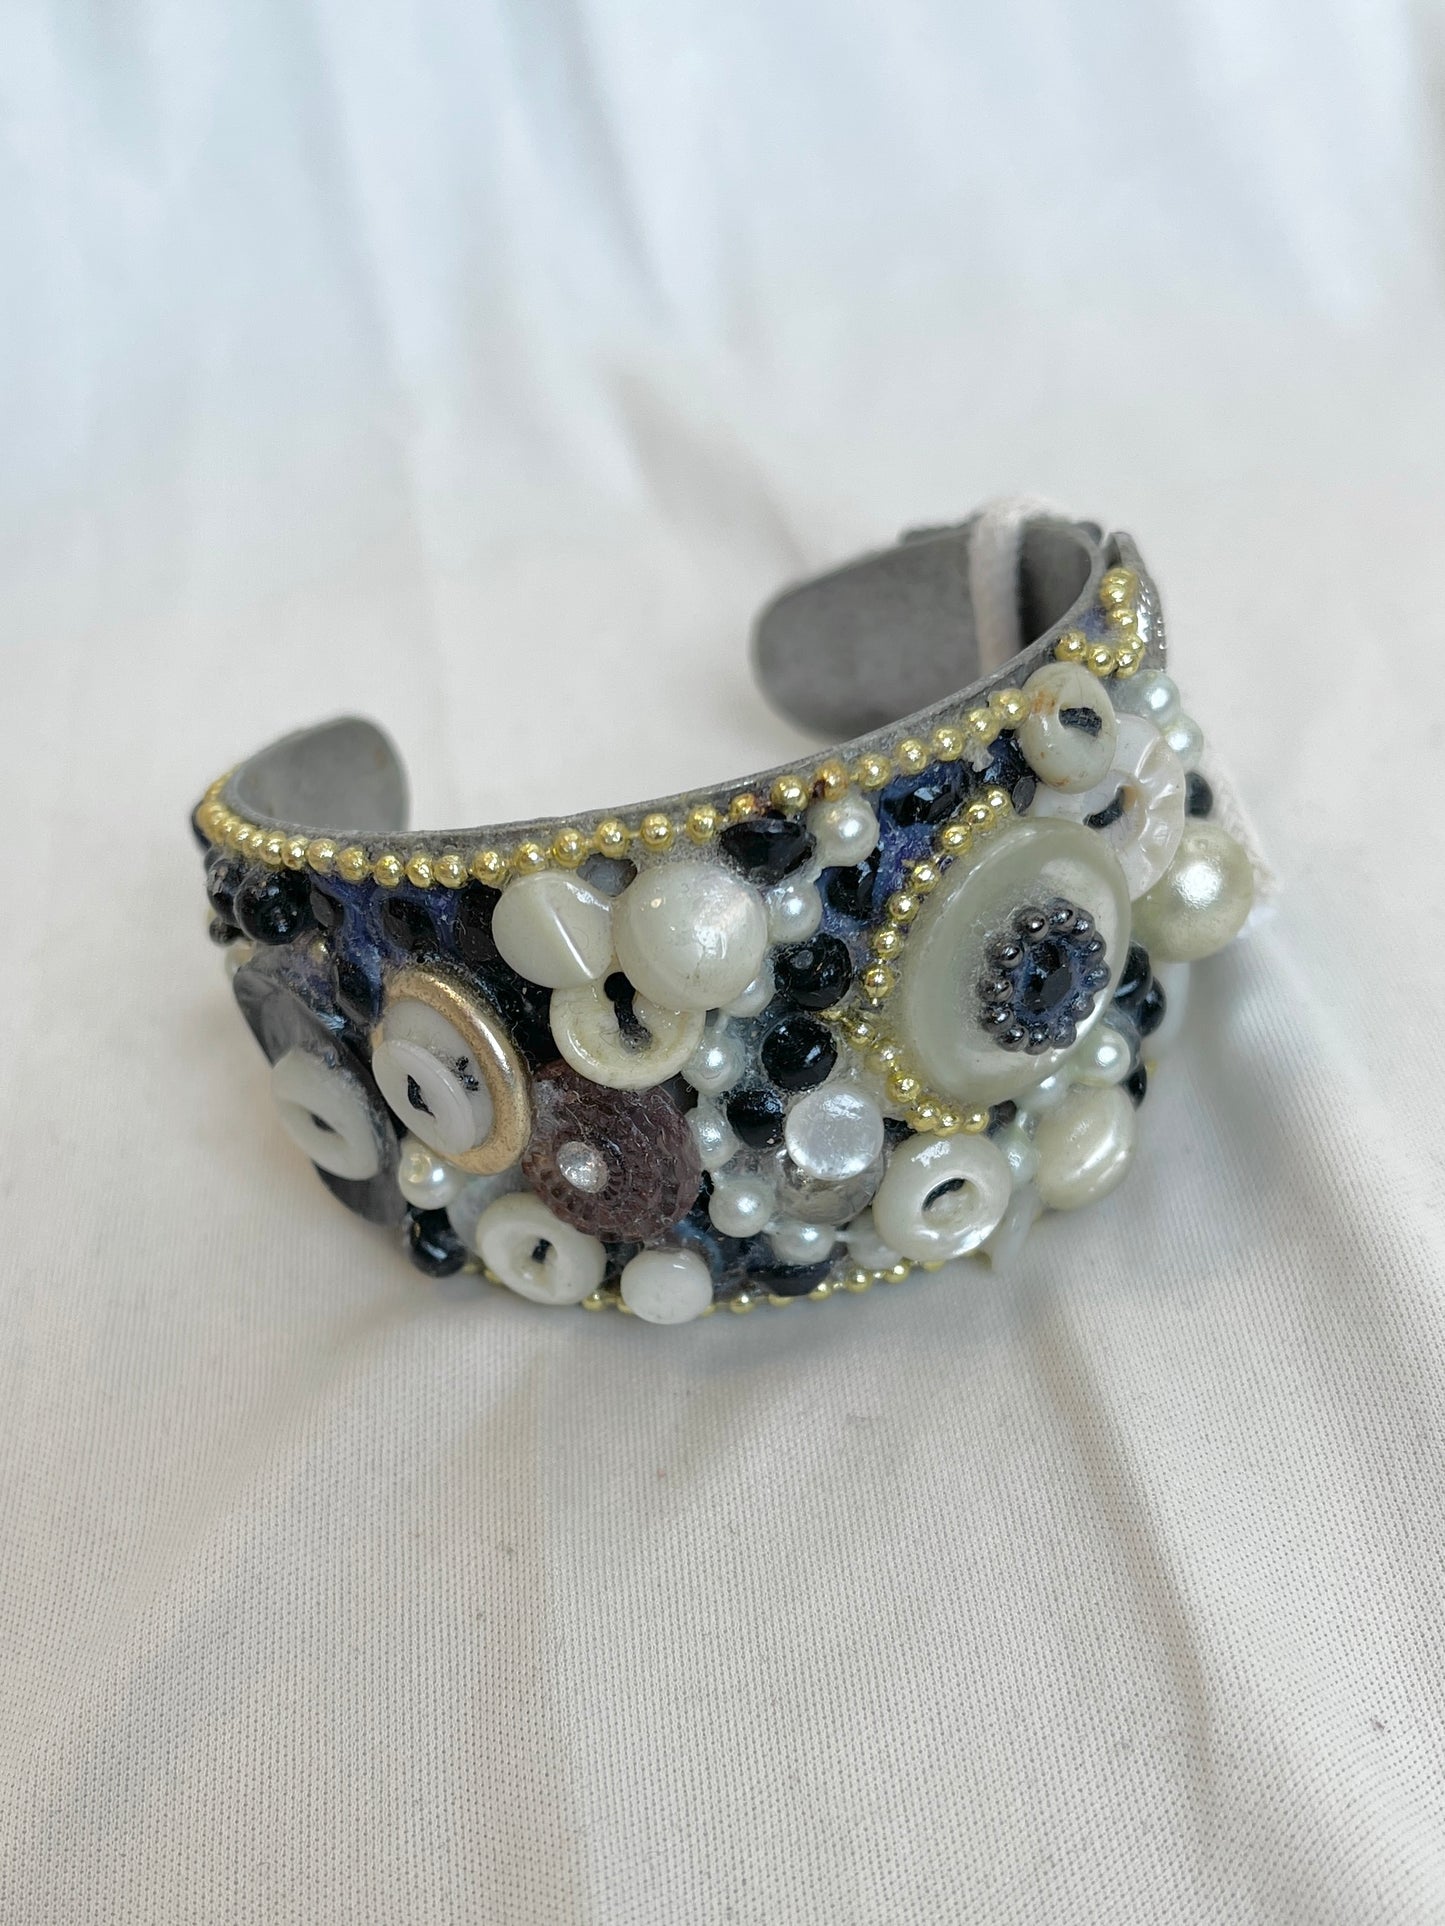 Assorted Buttons and Beads Bracelet